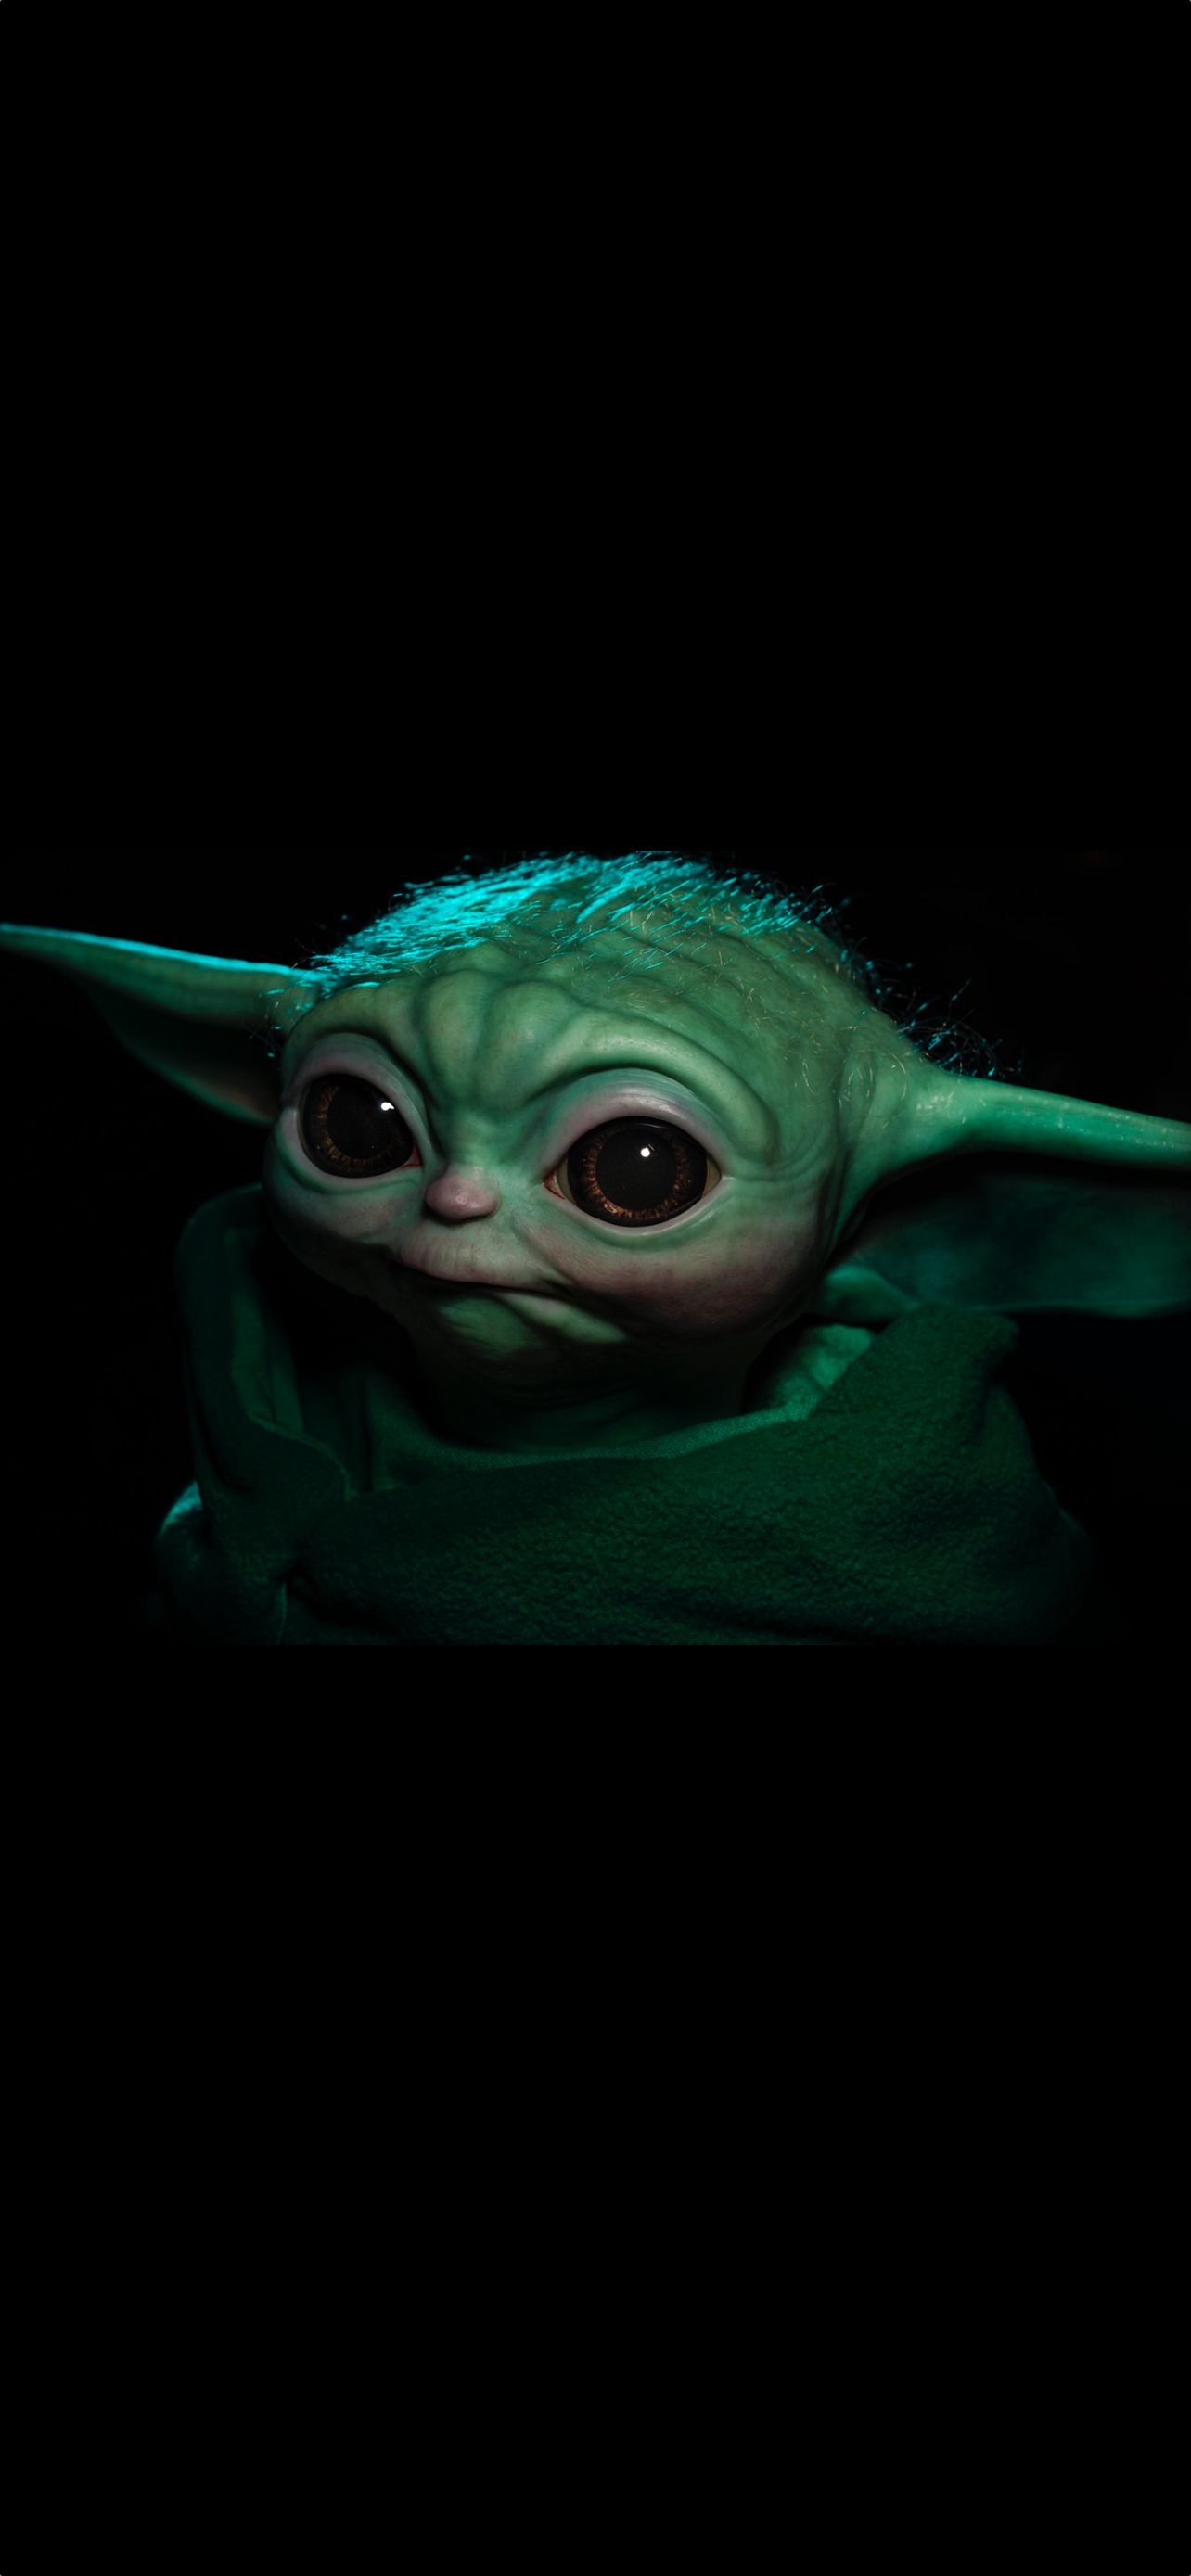 beautiful wallpaper of Grogu (the Child also known as Baby Yoda)